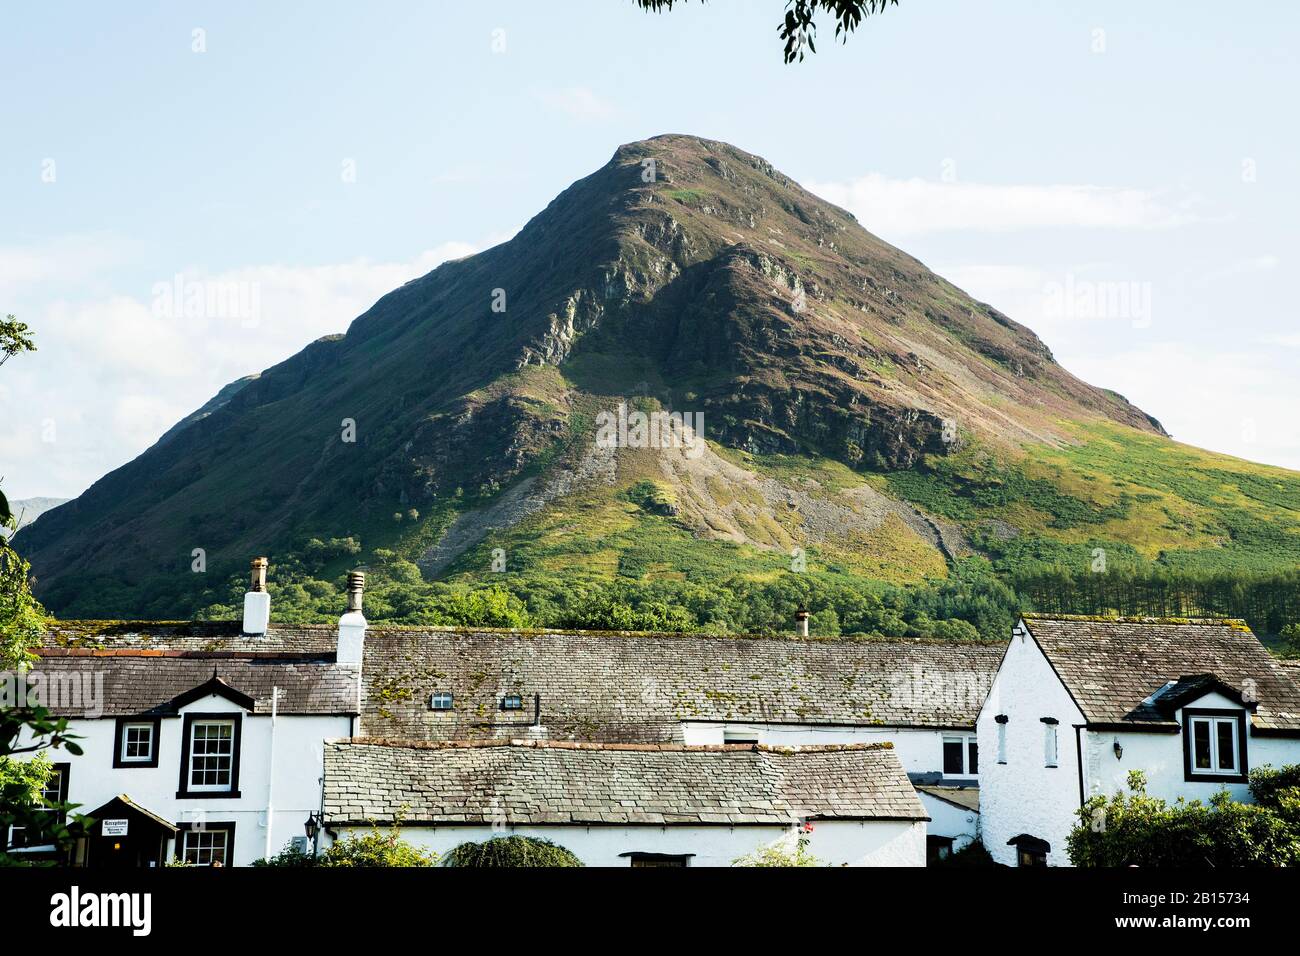 Mellbreak towers over the Kirkstile Inn at Loweswater in the Lake District National Park, Cumbria, England Stock Photo